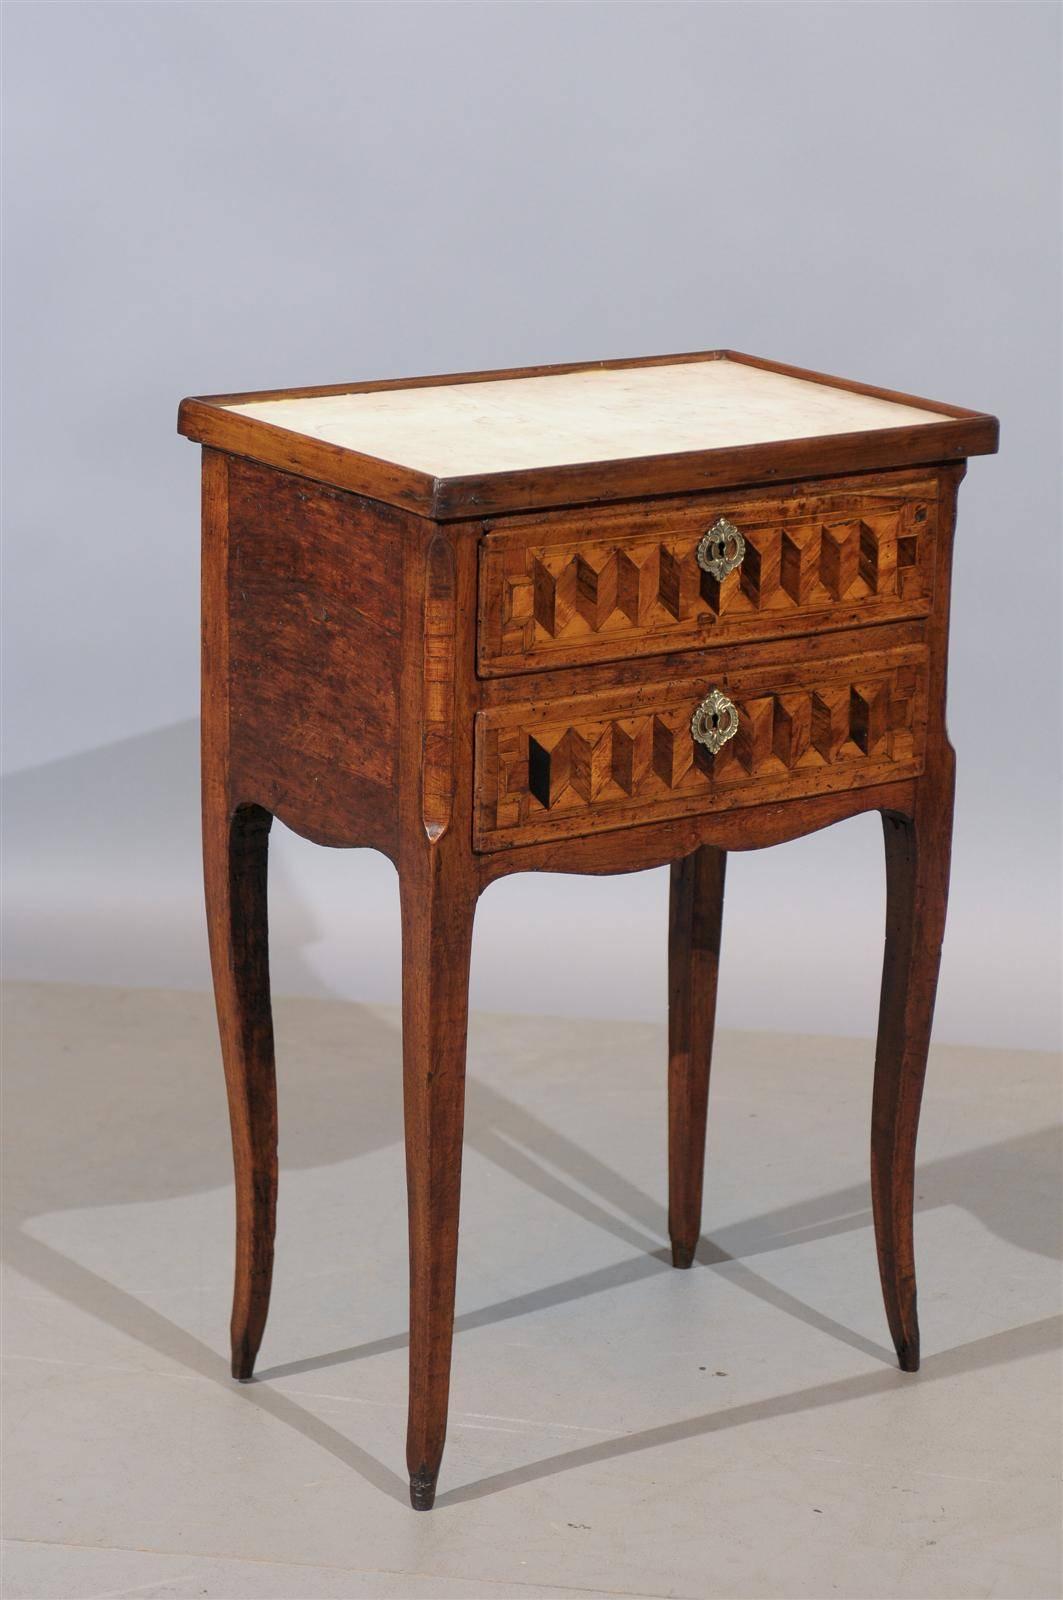 An 18th century French Louis XV chevet / side table with two drawers, parquetry inlay and white marble top. Dating from the second half of the 18th century and French in origin.